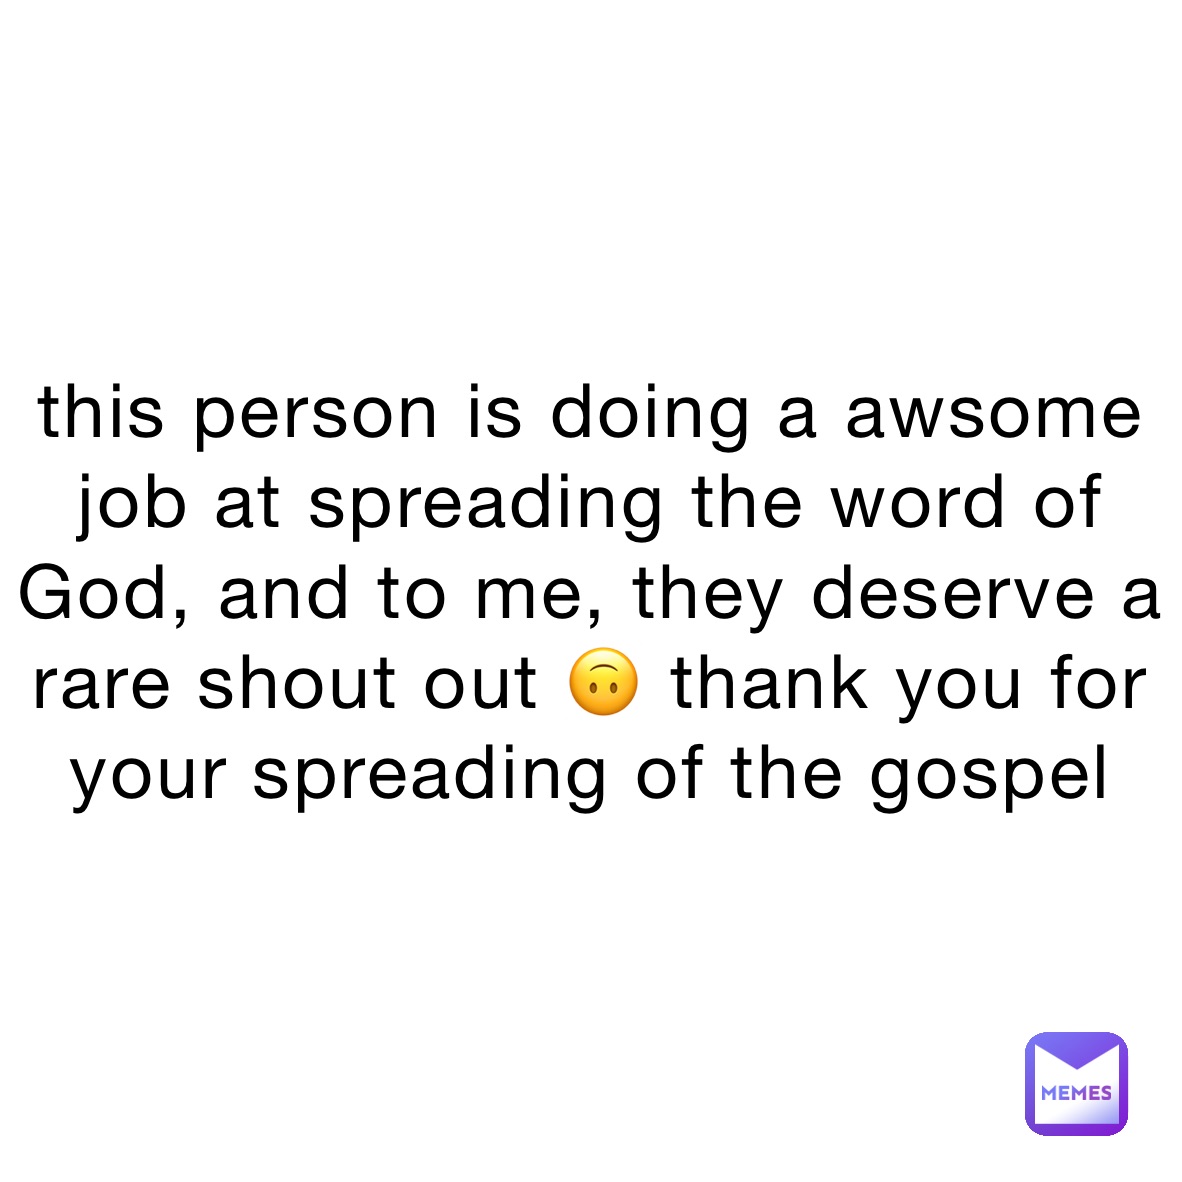 this person is doing a awsome job at spreading the word of God, and to me, they deserve a rare shout out 🙃 thank you for your spreading of the gospel 